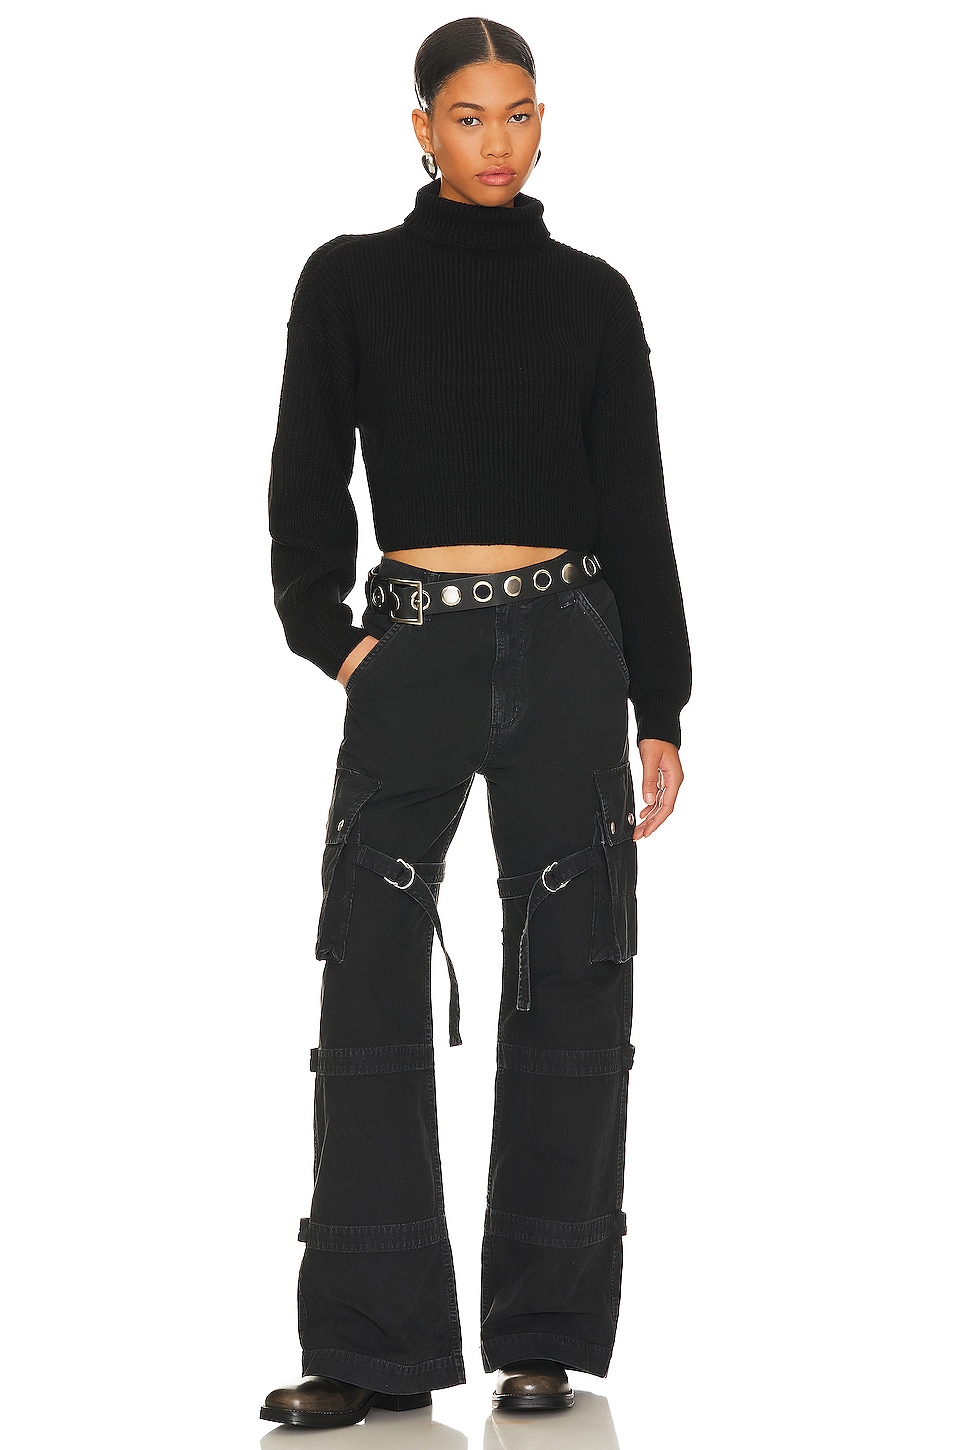 black turtleneck and jeans outfit inspo 